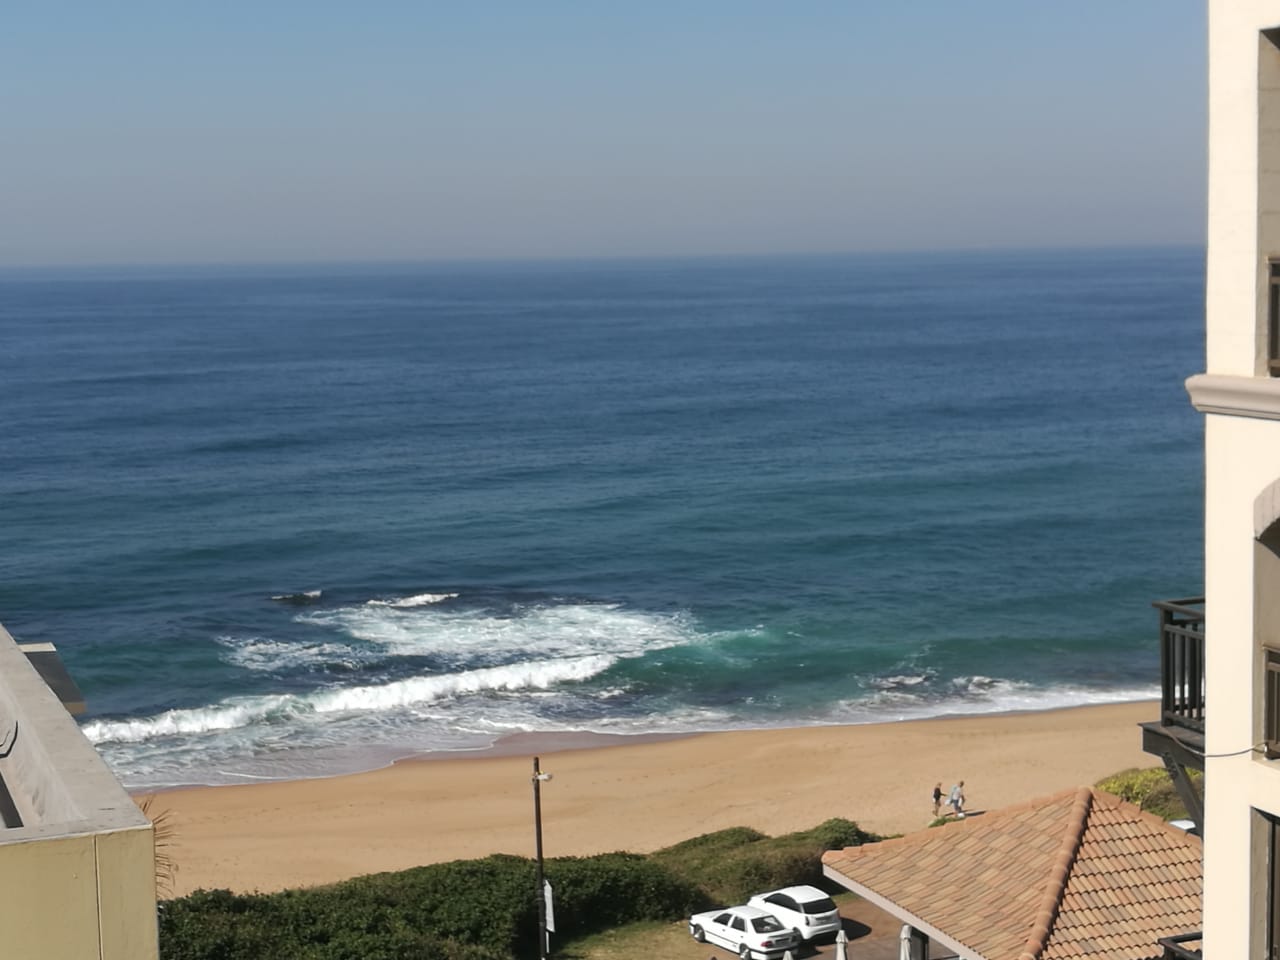  Accommodation available in Ballito